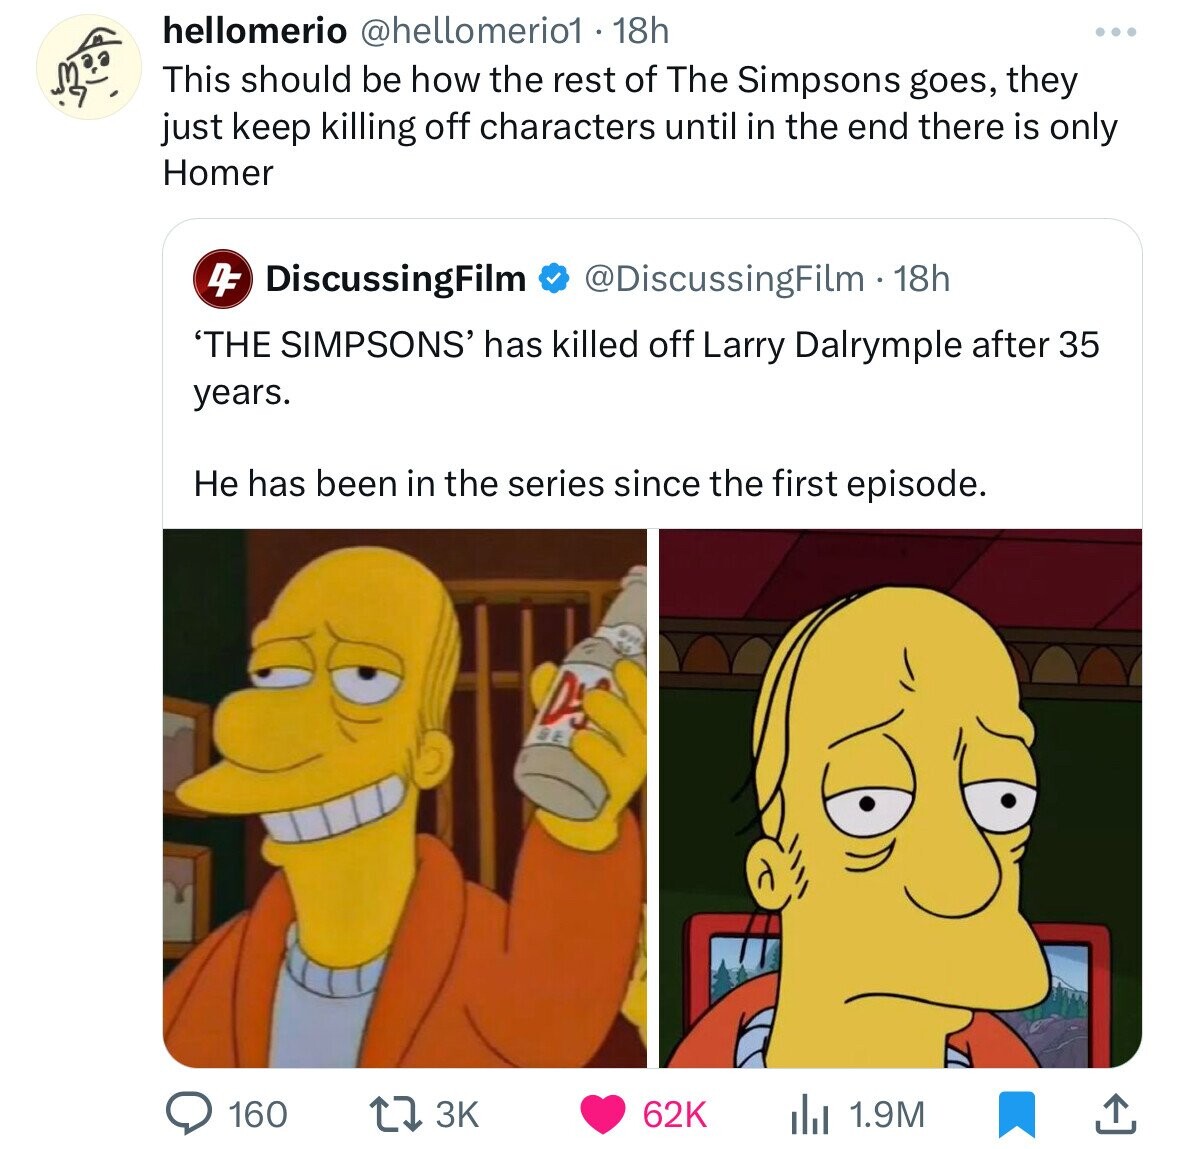 cartoon - hellomerio 18h This should be how the rest of The Simpsons goes, they just keep killing off characters until in the end there is only Homer 4 DiscussingFilm 18h 'The Simpsons' has killed off Larry Dalrymple after 35 years. He has been in the ser